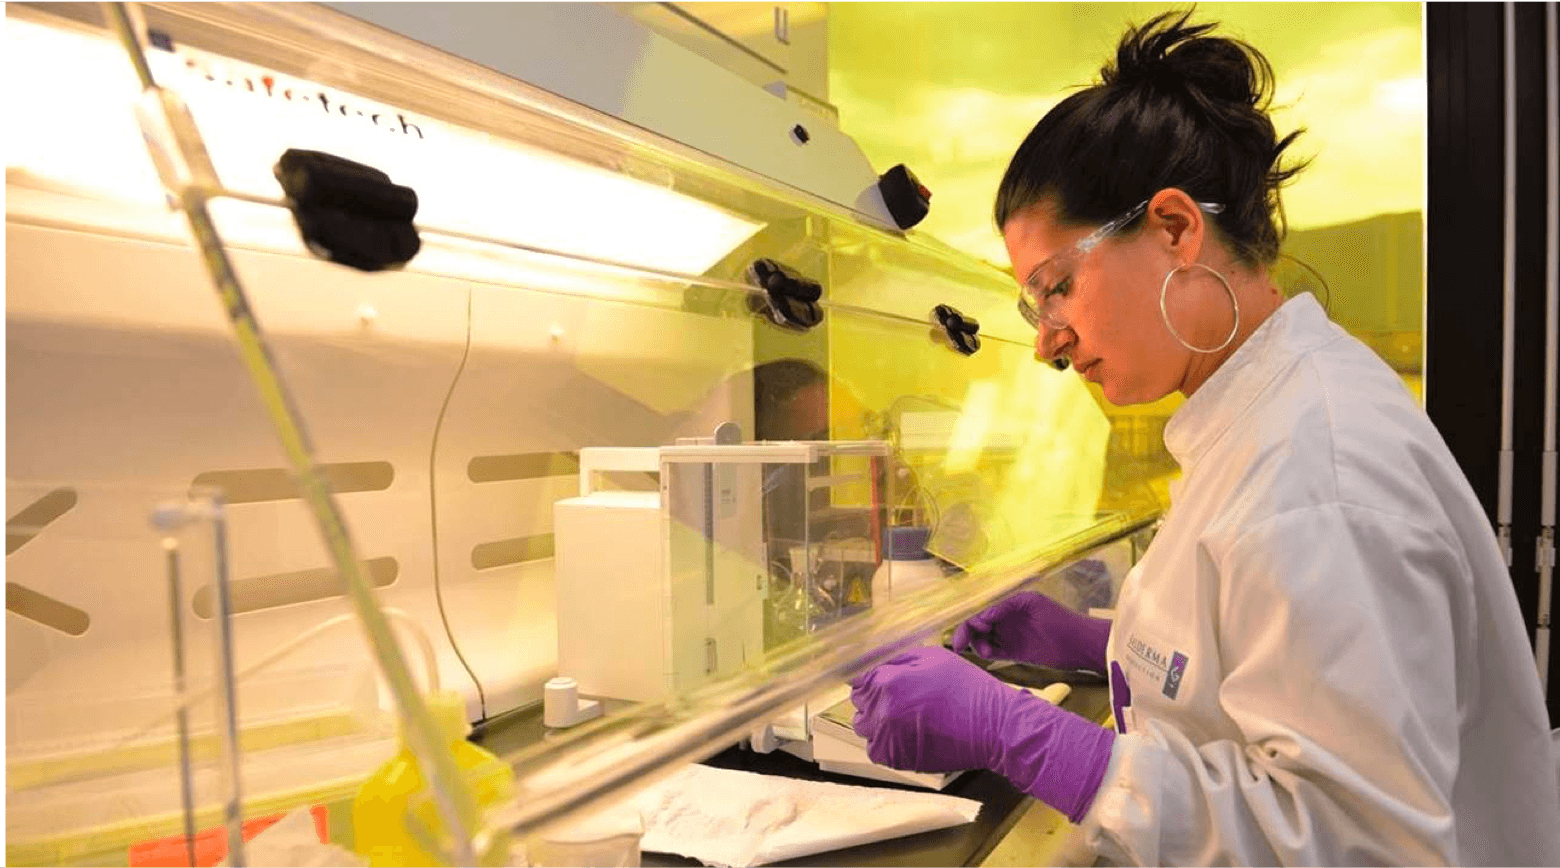 Woman working in a Galderma laboratory, now the world's largest pure-play dermatology company